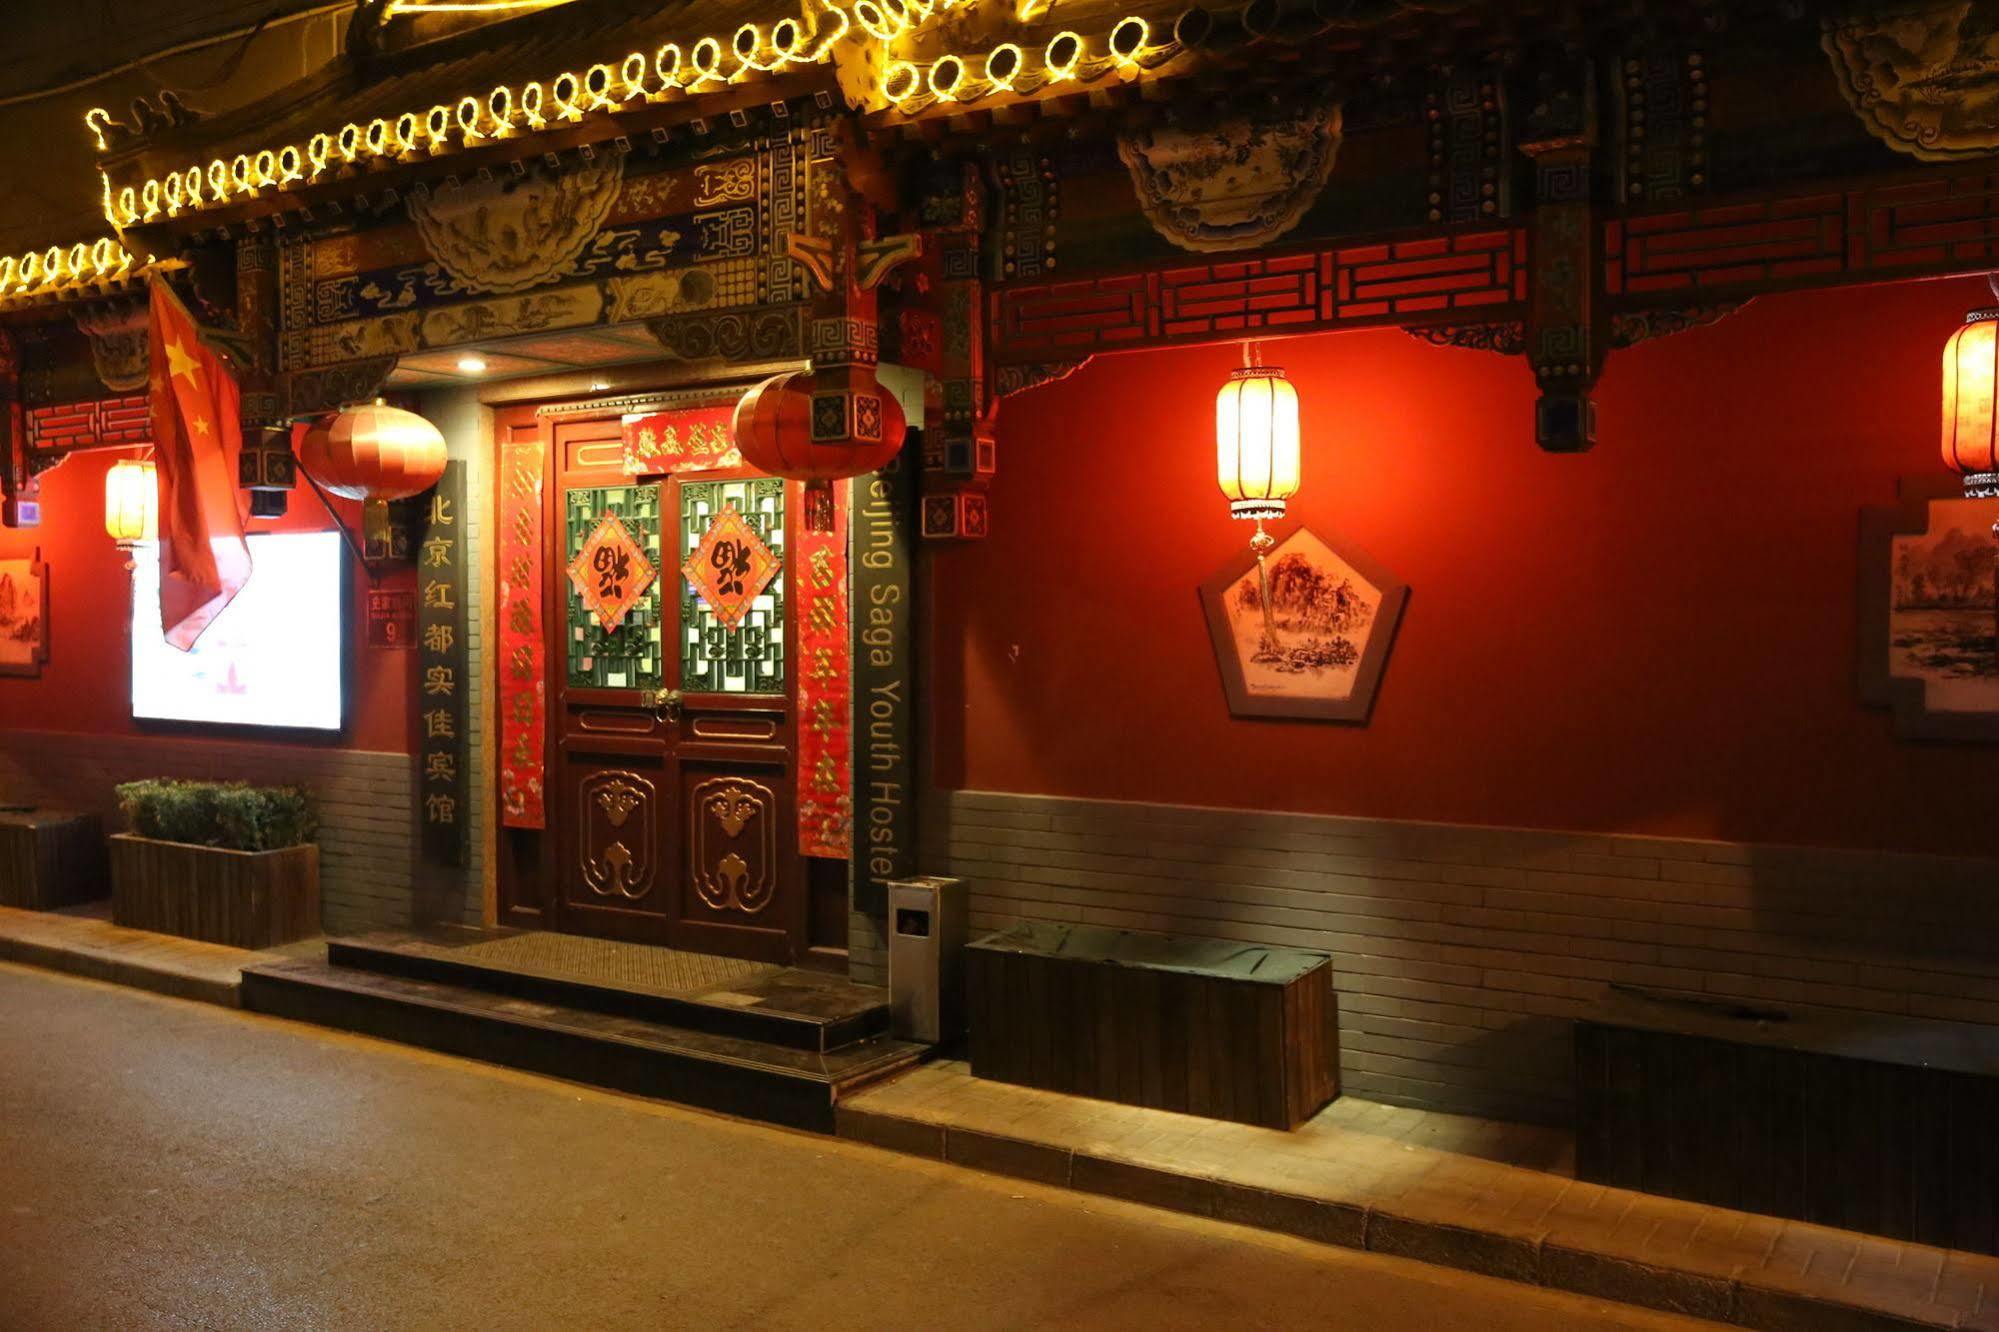 Happy Dragon City Culture Hotel -In The City Center With Ticket Service&Food Recommendation,Near Tian'Anmen Forbidden City,Wangfujing Walking Street,Easy To Get Any Tour Sights In بكين المظهر الخارجي الصورة